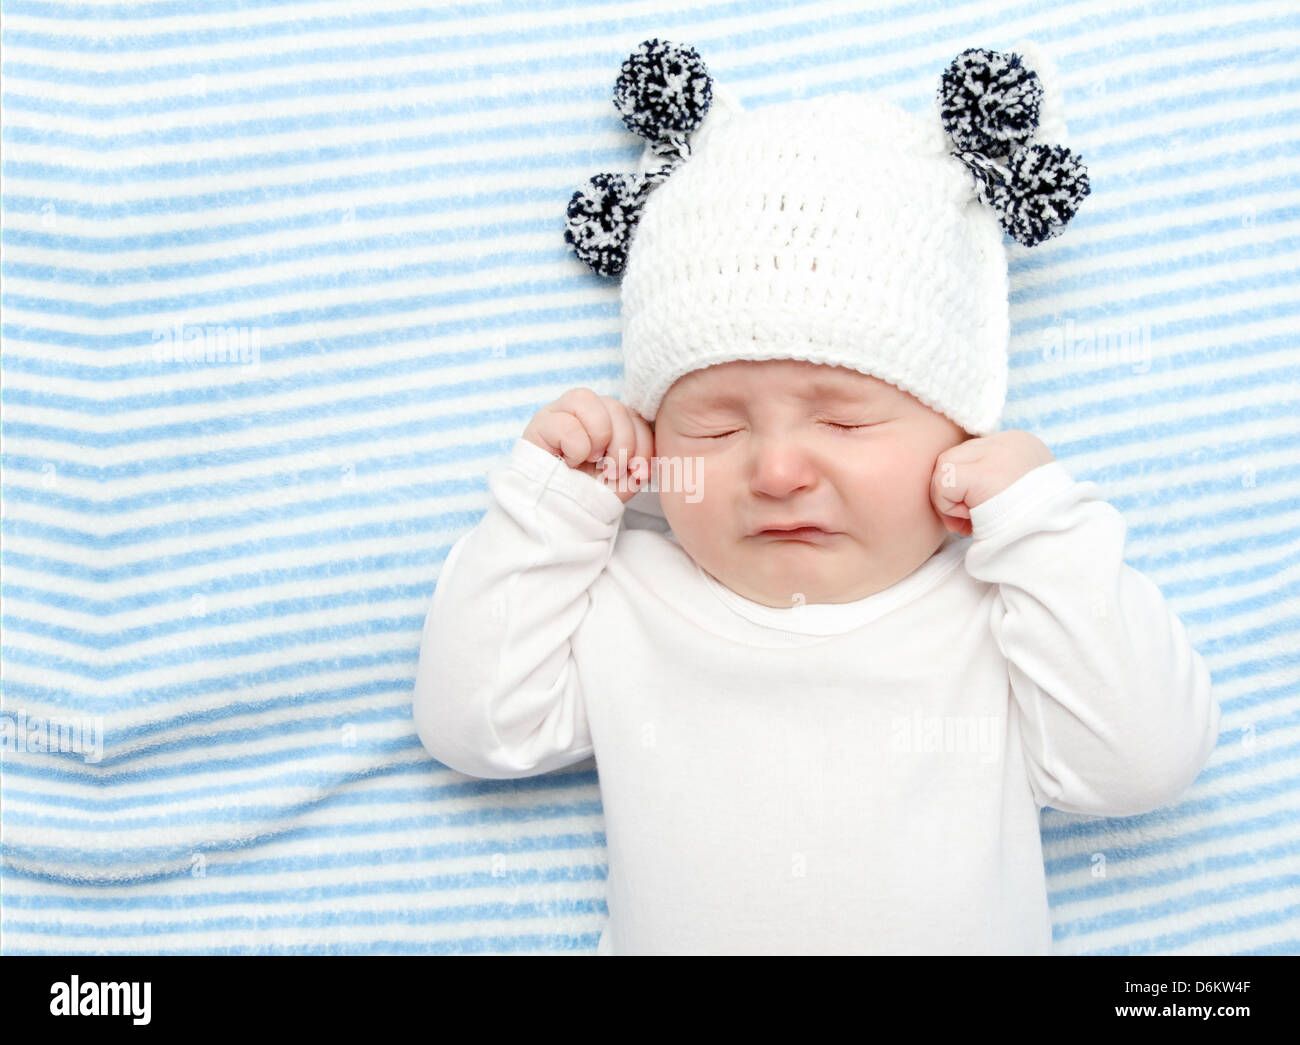 Little baby crying on bed Banque D'Images